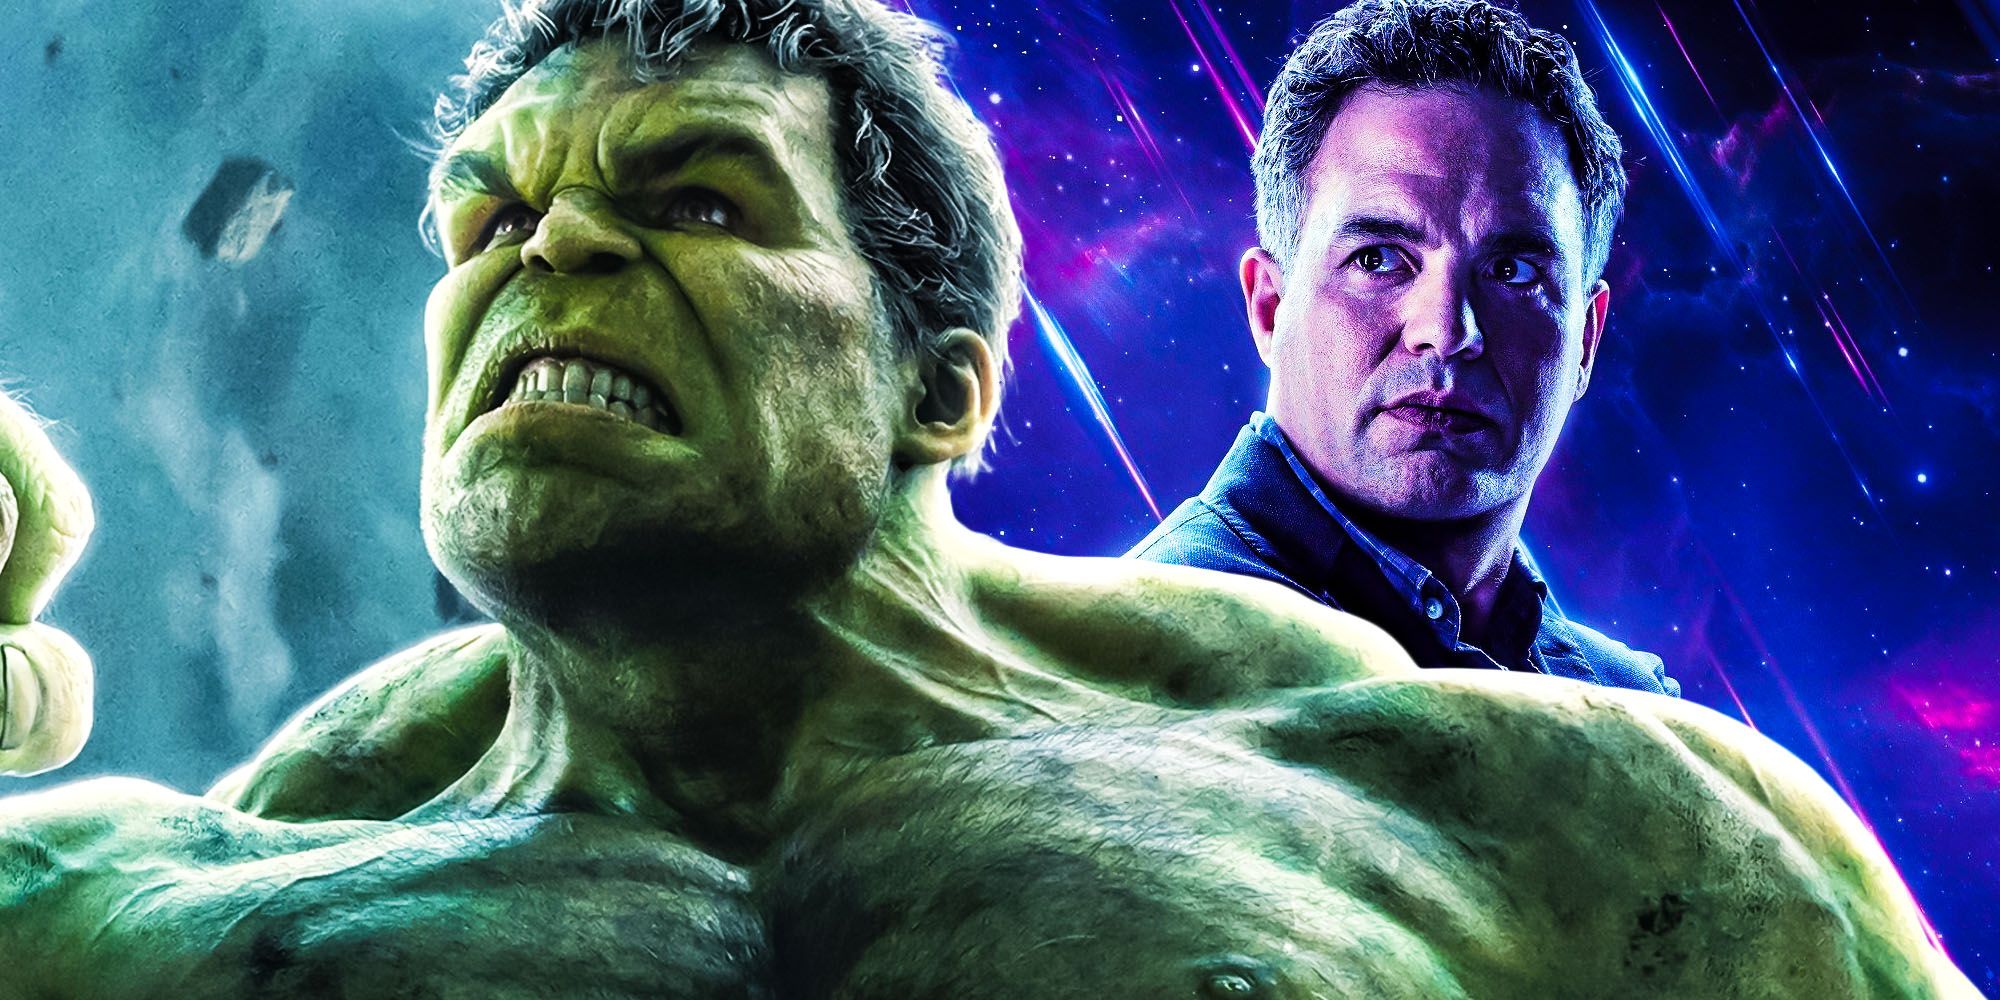 mcu-phase-5-will-see-hulk-vs-bruce-banner-marvel-theory-explained